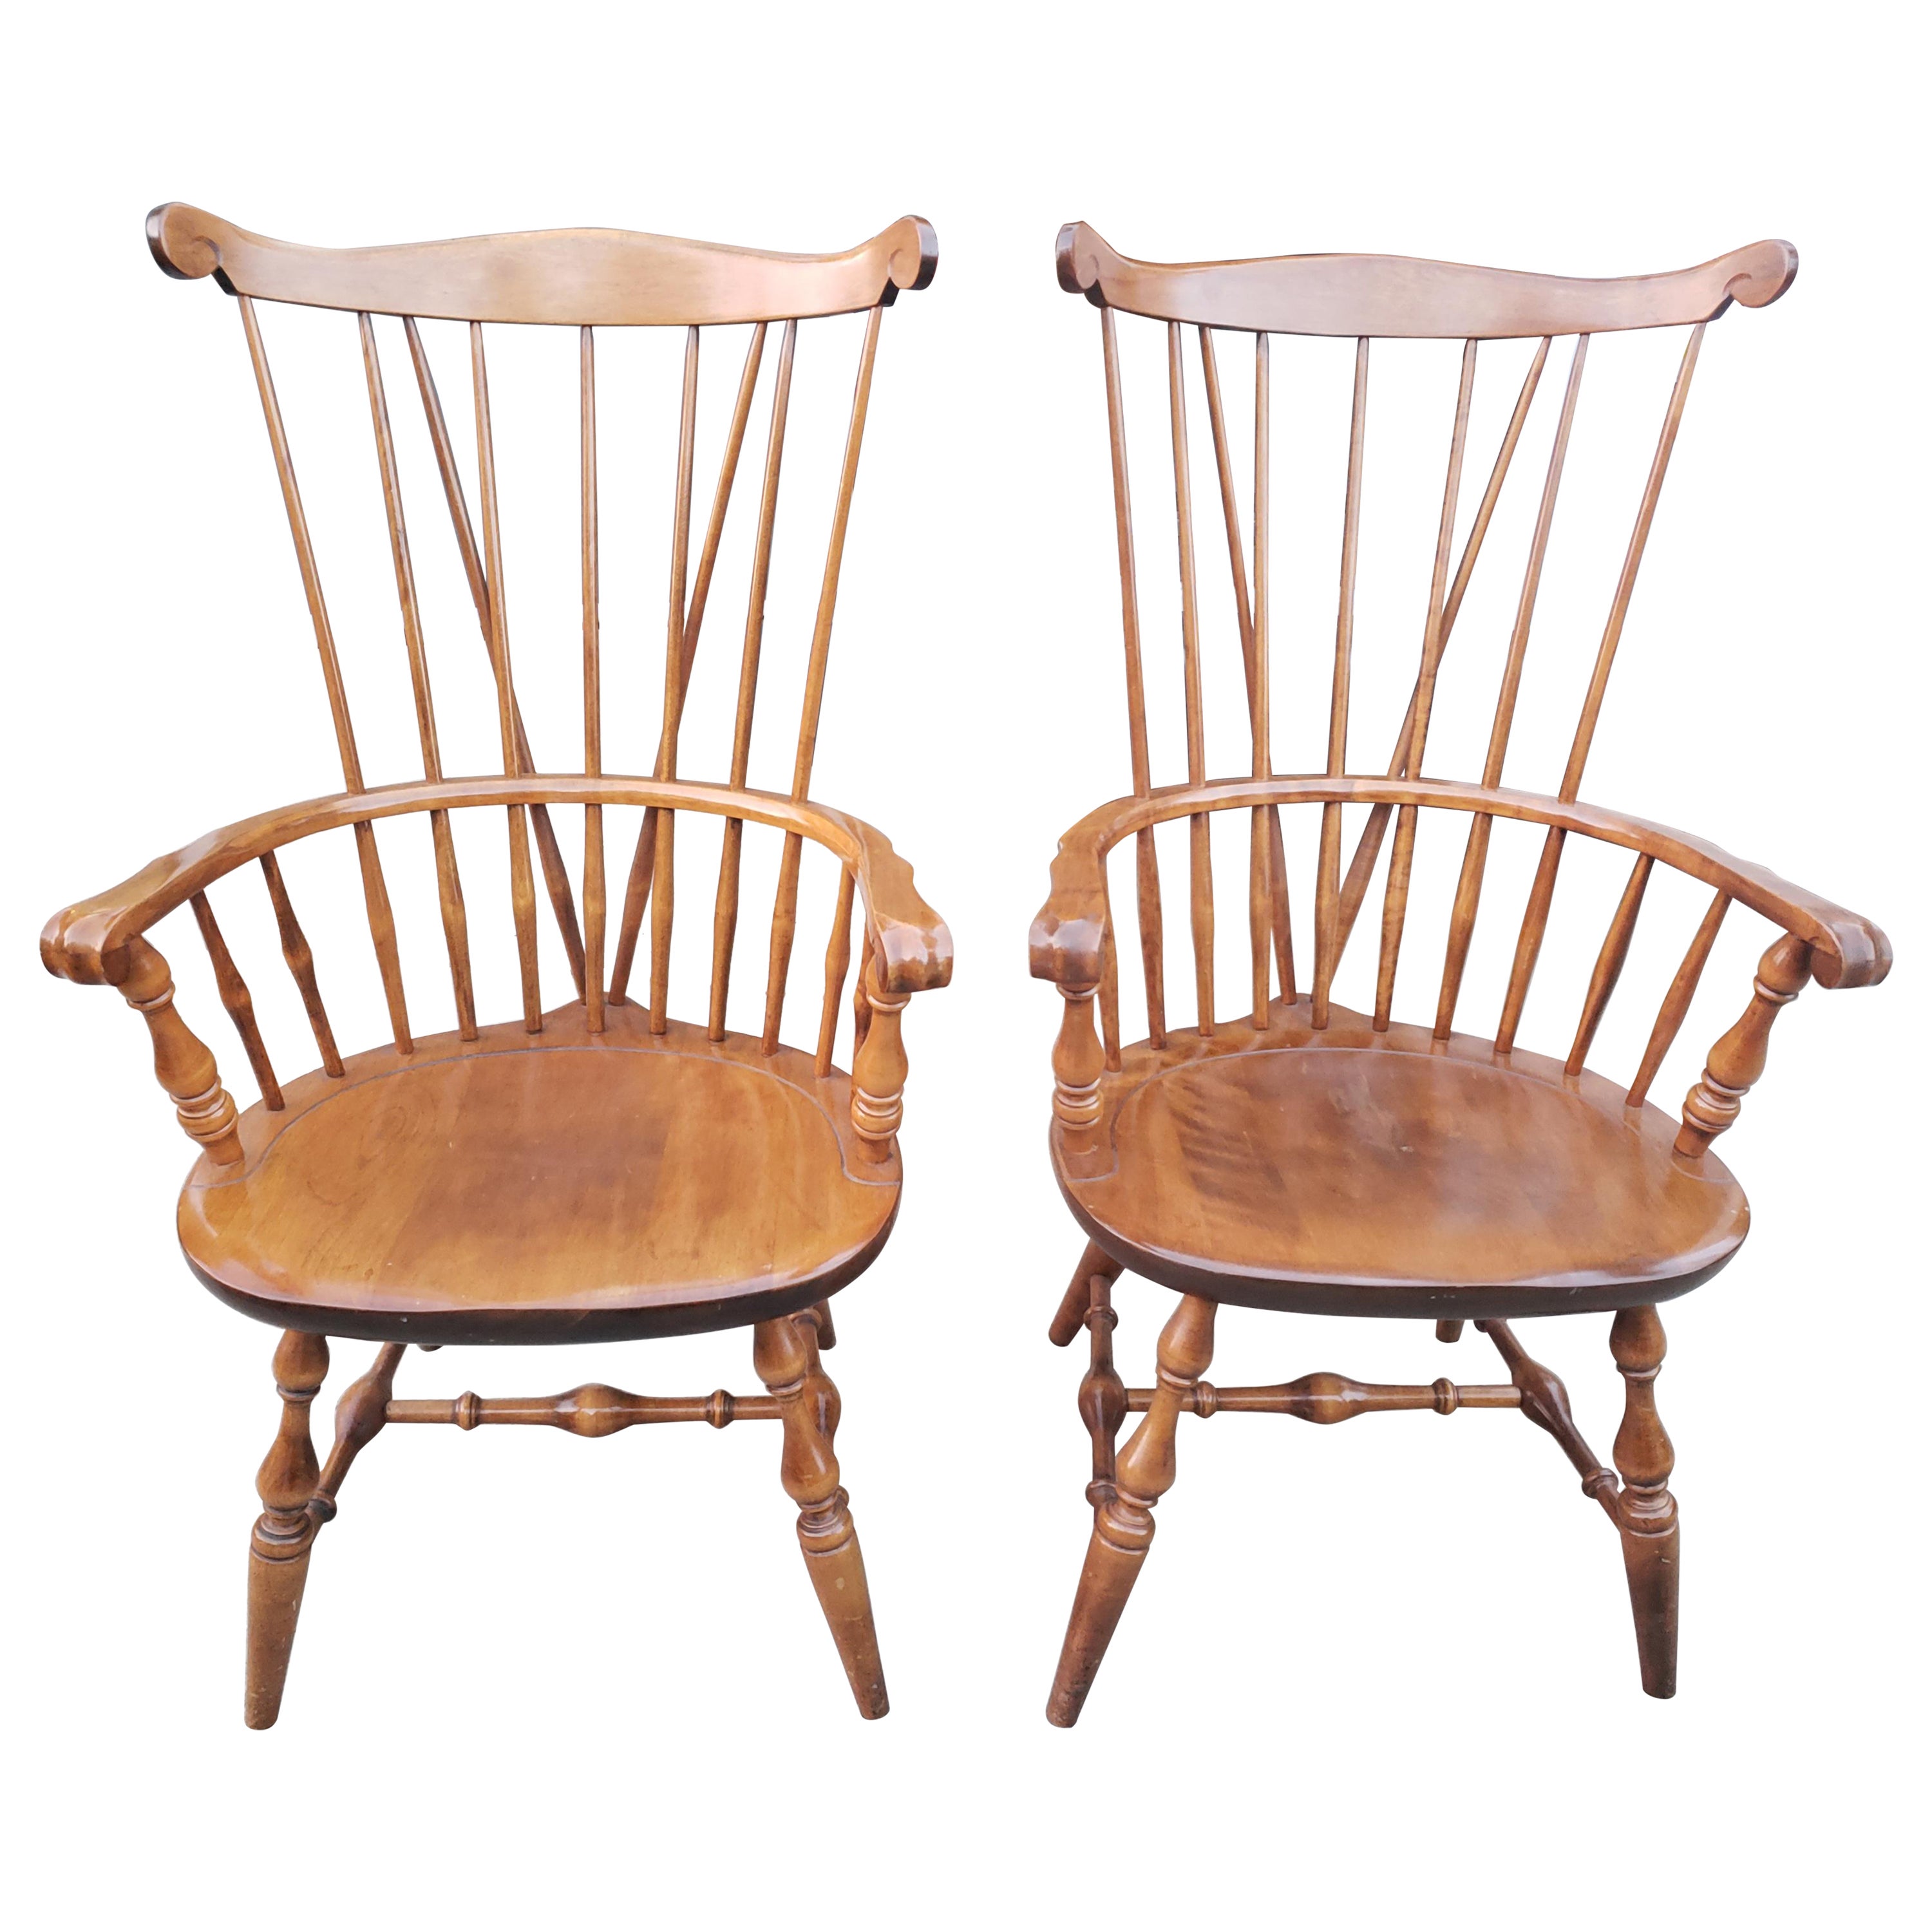 Nichols & Stone Old Pine Finish Solid Maple Windsor Brace Back Arm Chairs, Pair